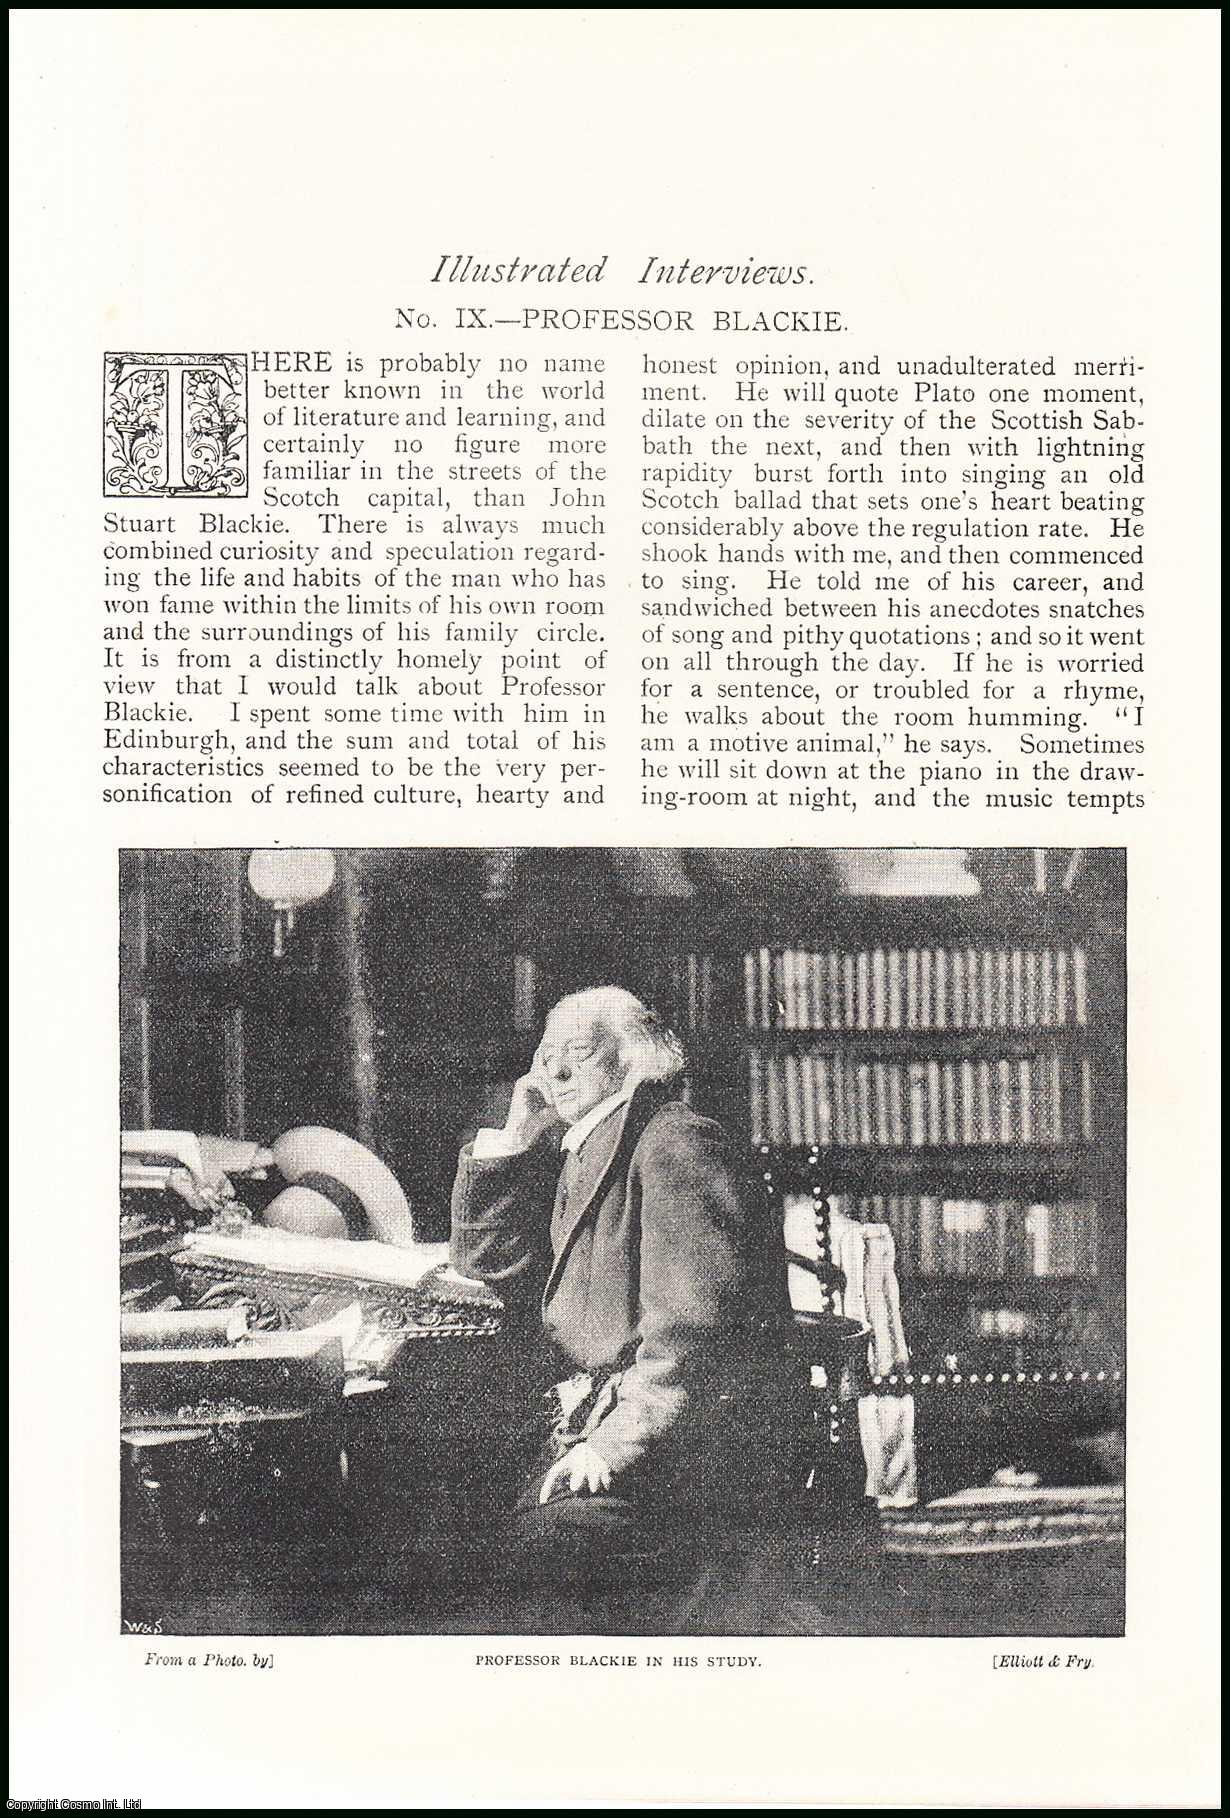 Harry How - Professor John Stuart Blackie, a Scottish scholar and man of letters : Illustrated Interview. An uncommon original article from The Strand Magazine, 1892.